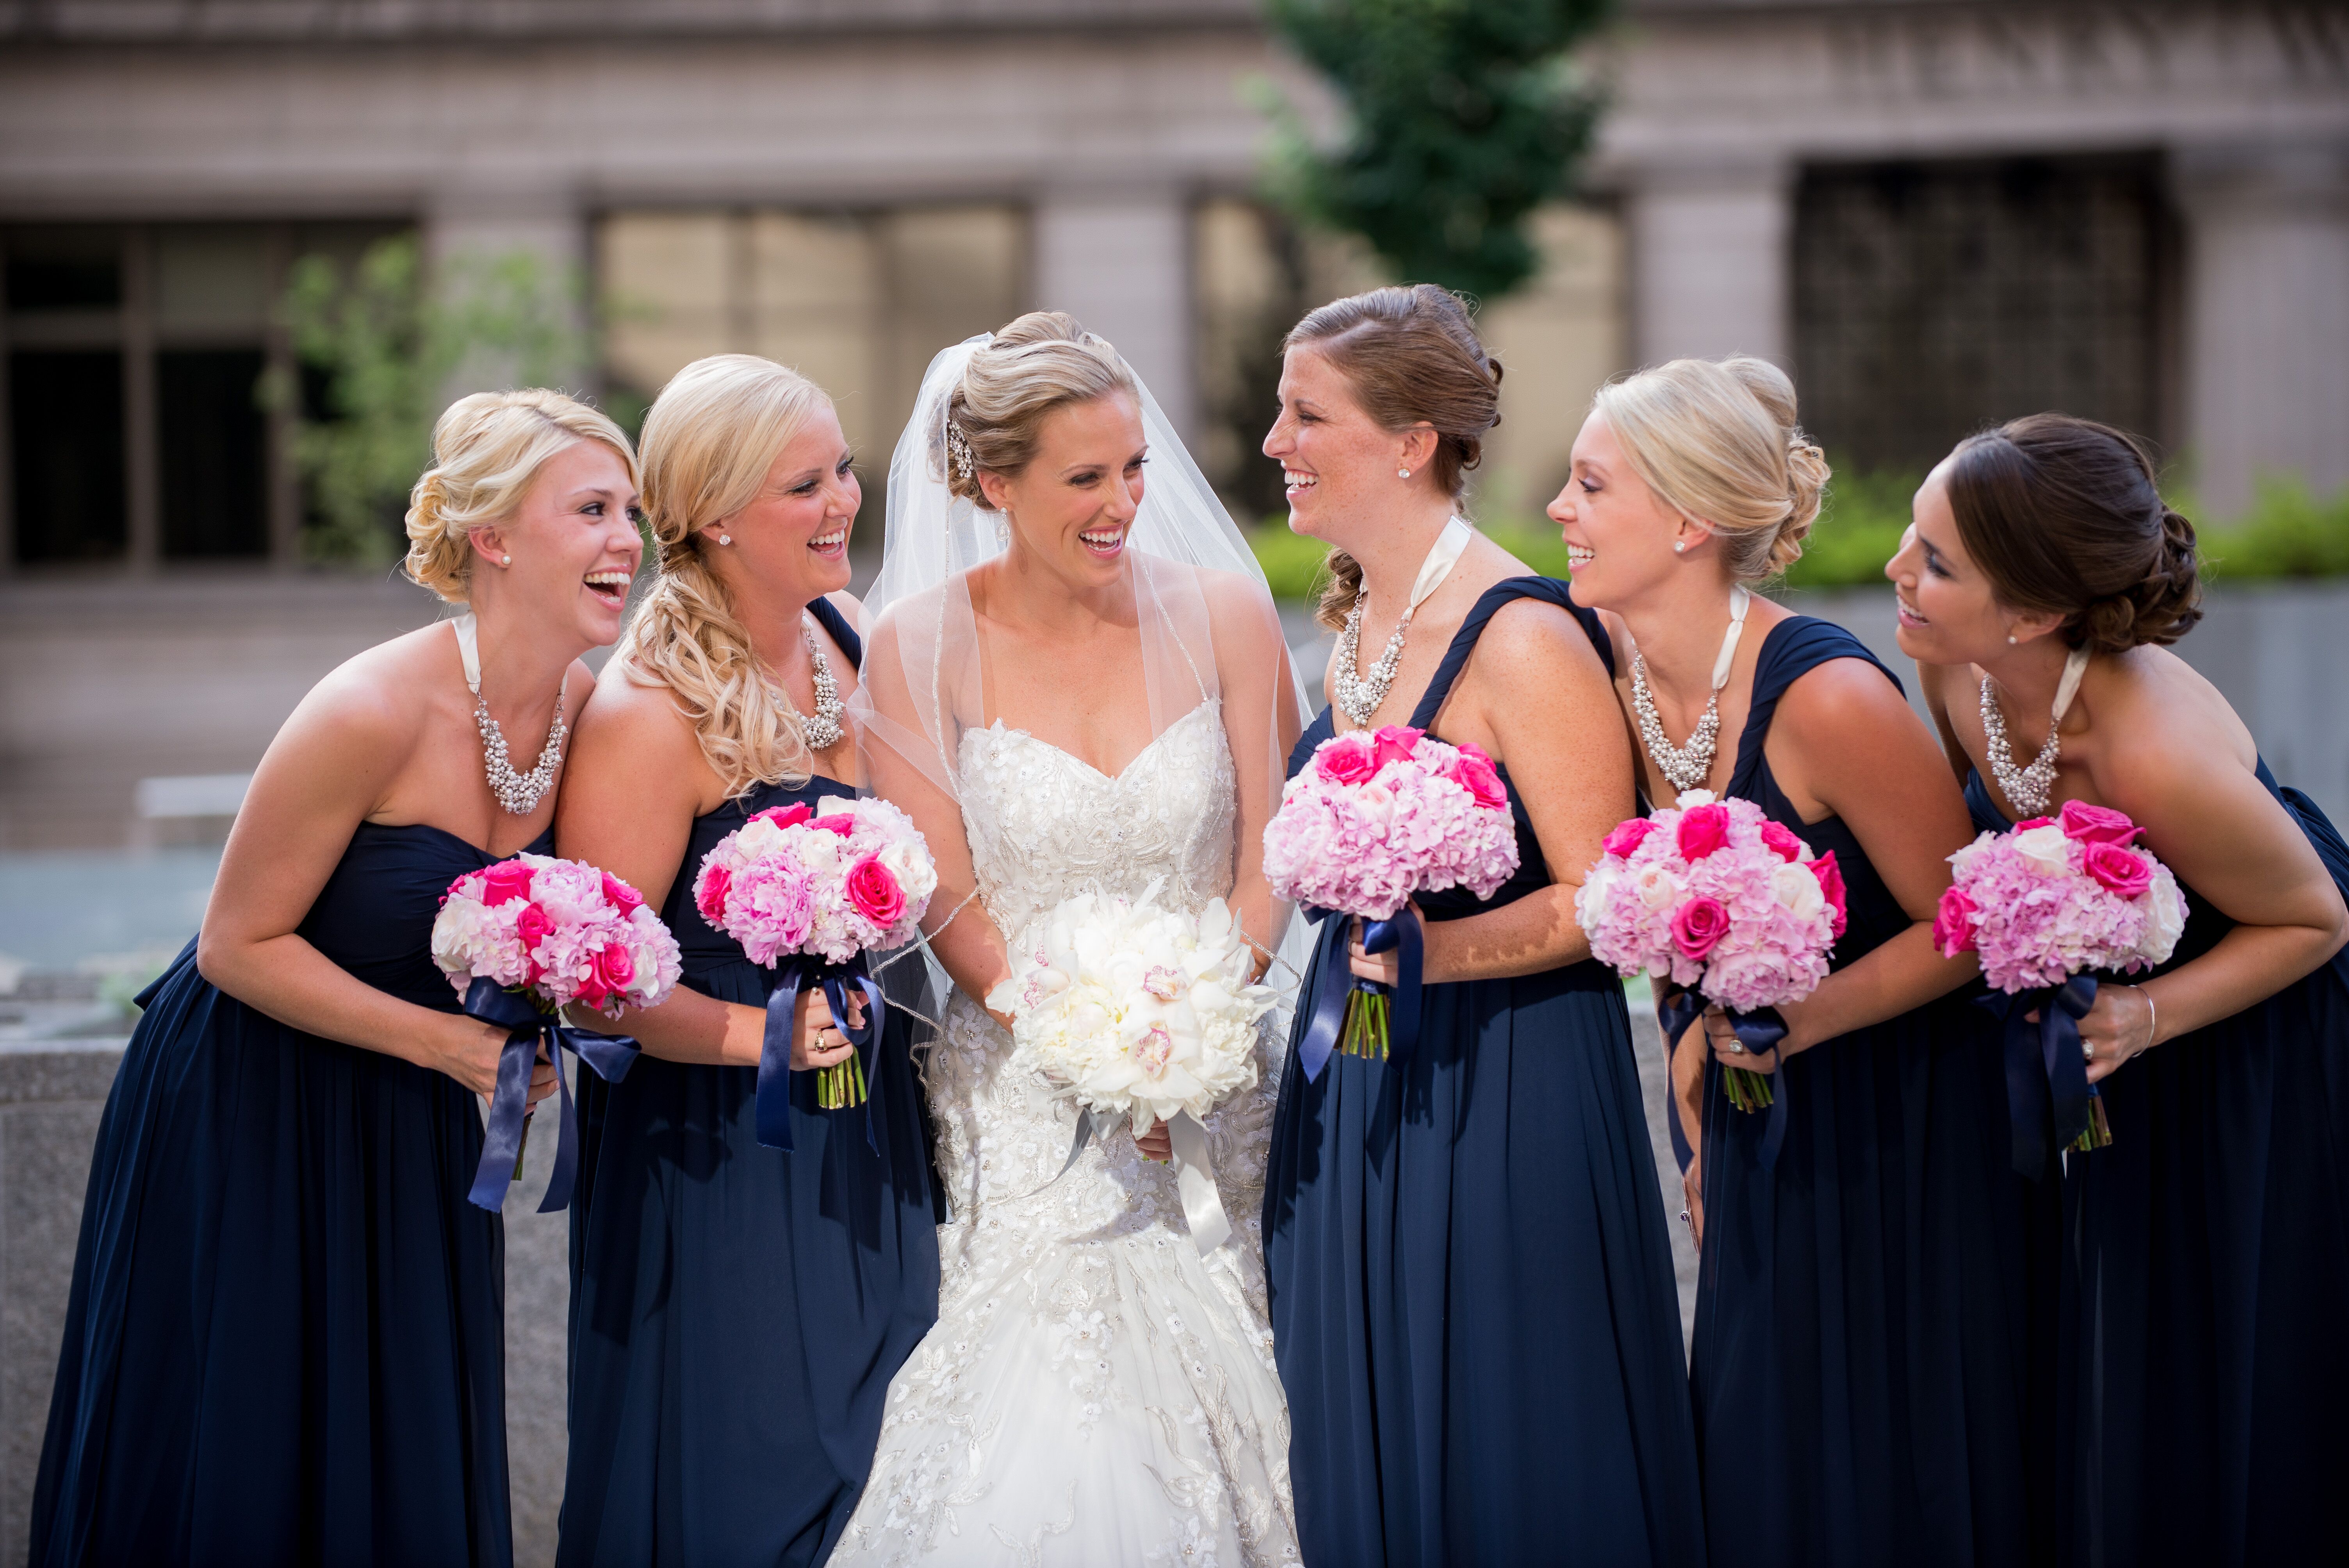 Bridesmaids in Navy with Bright Pink Bouquets